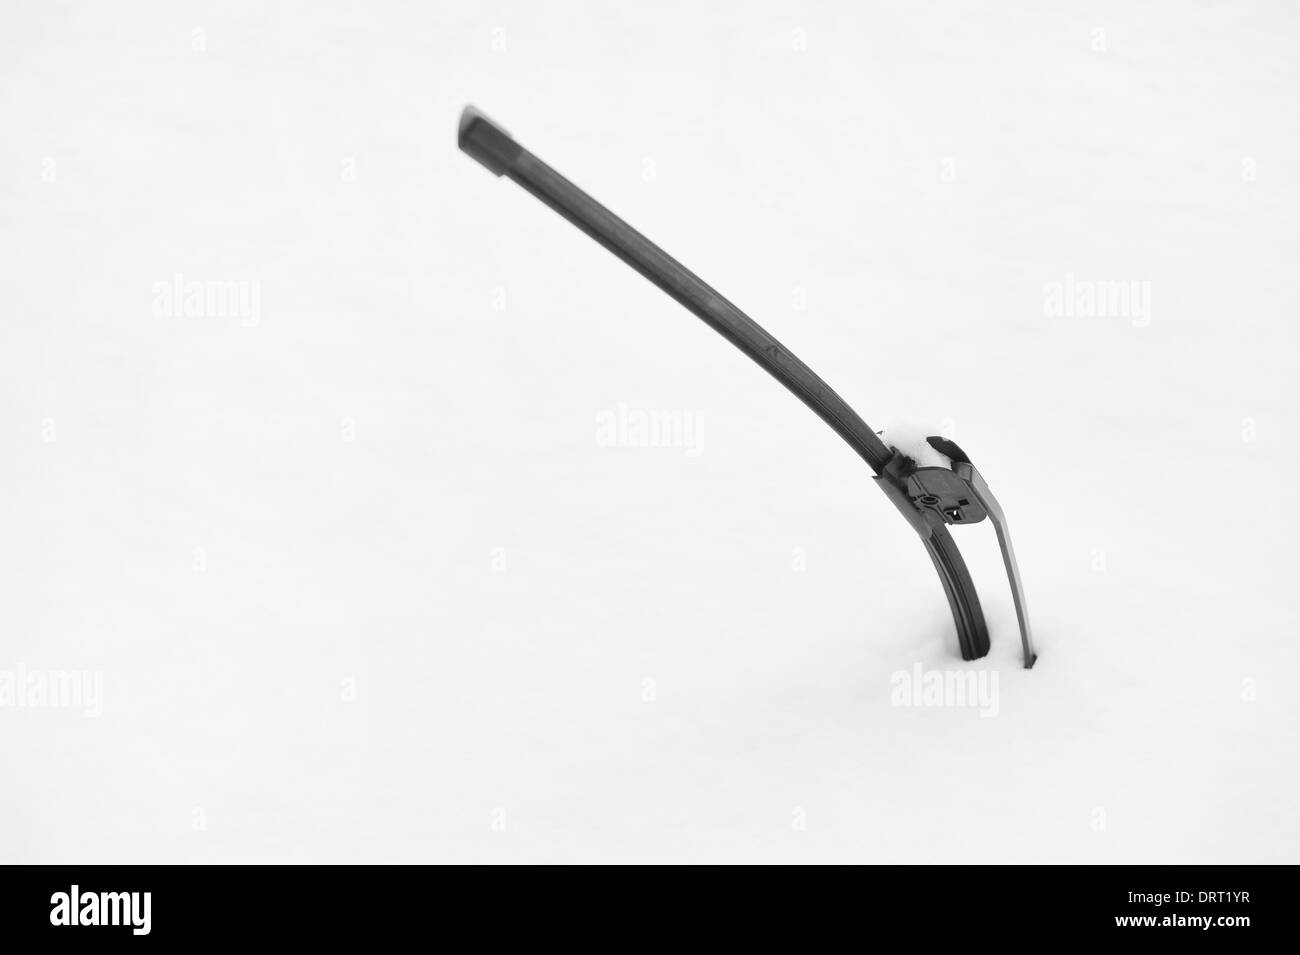 Windshield wiper of an snow covered car after heavy snowfall Stock Photo